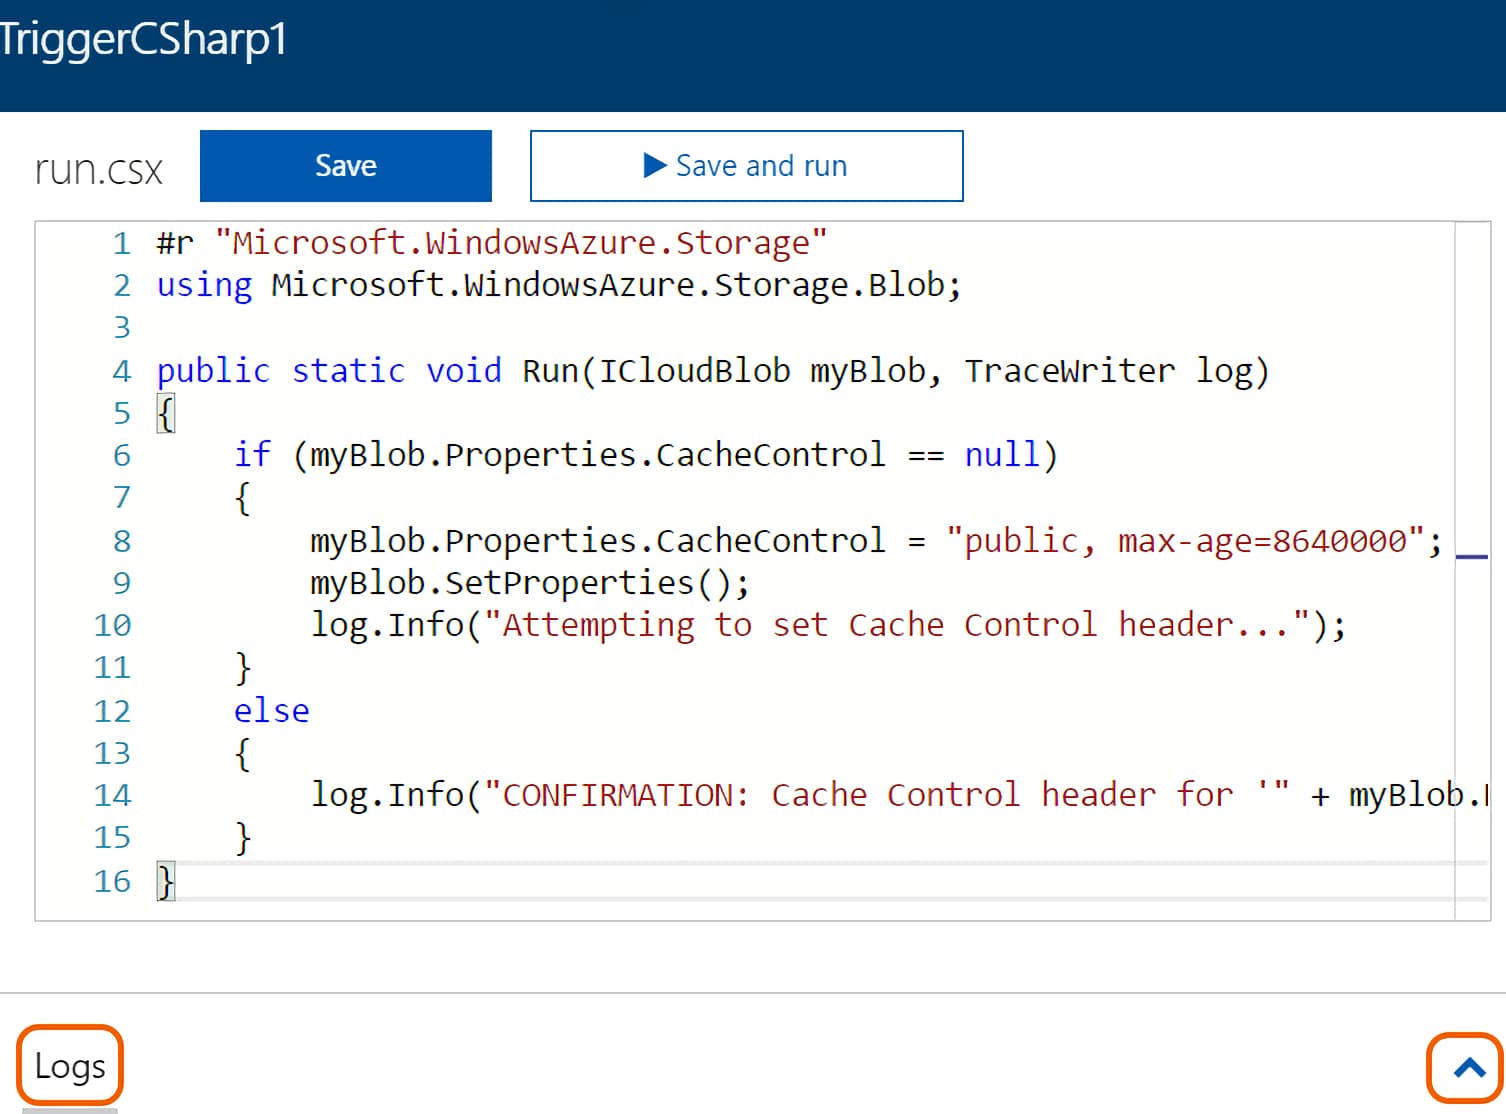 A function in the Azure function app